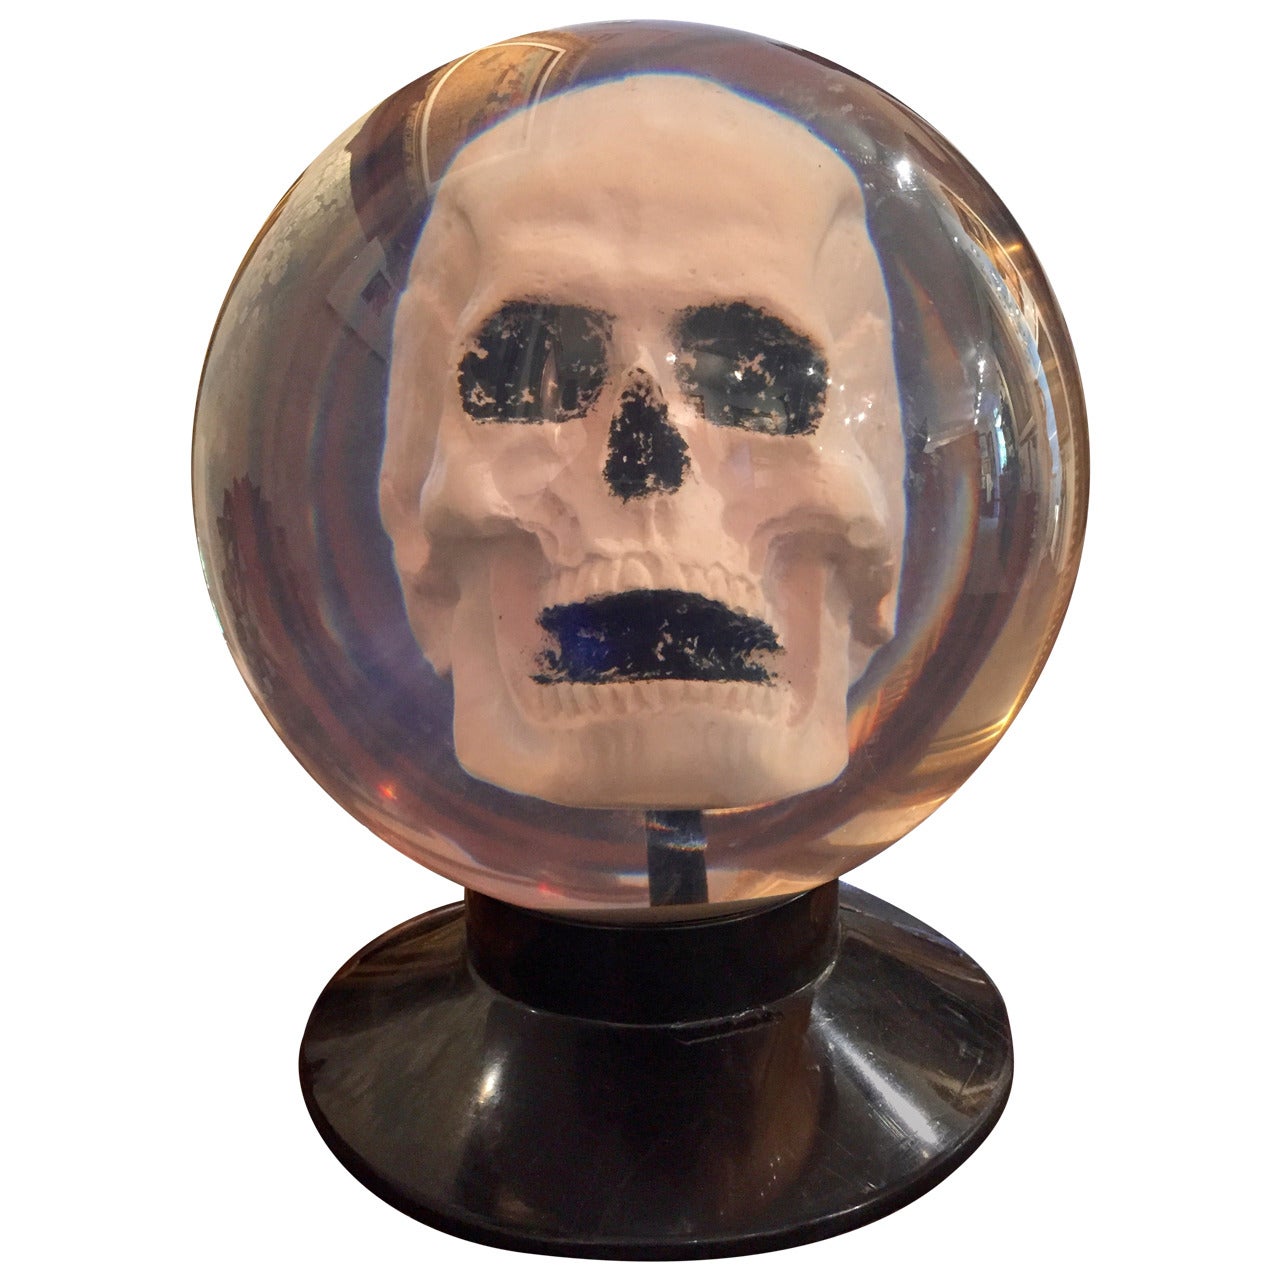 Your Very Own Plaster Skull Encased in a Clear Un-Drilled Bowling Ball